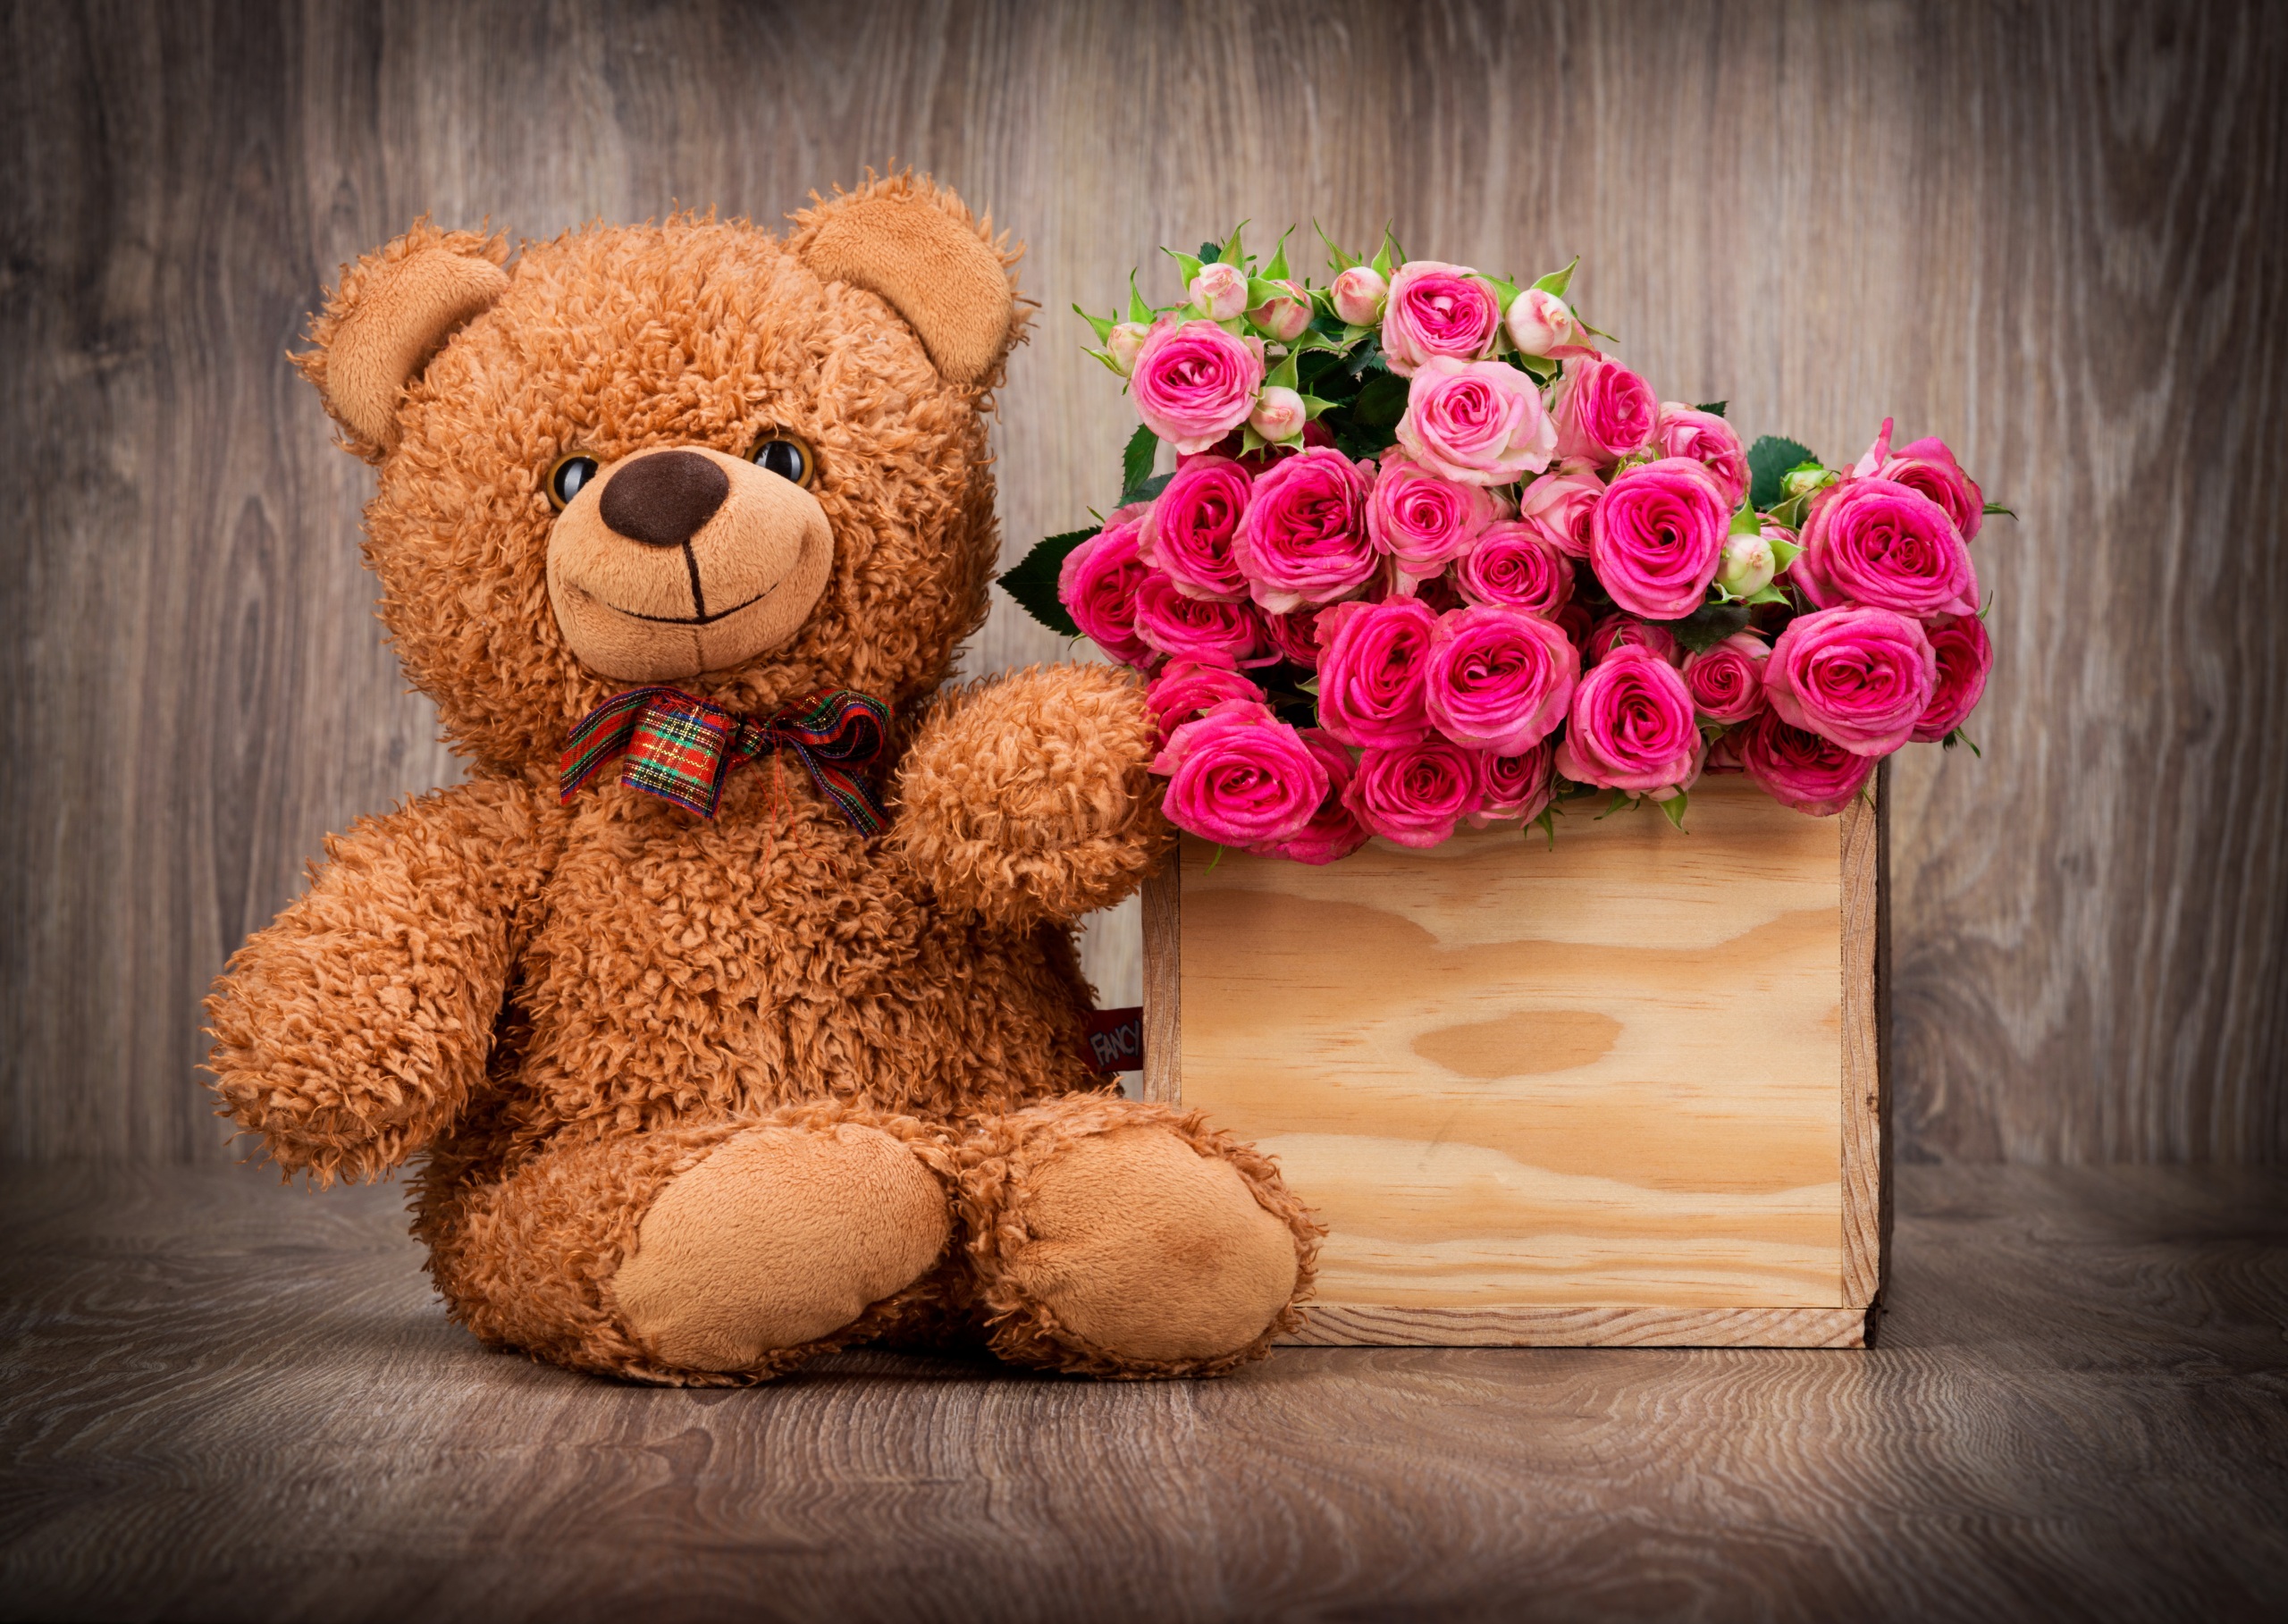 Cute Teddy Bear Wallpaper With Pink Roses In Box HD For